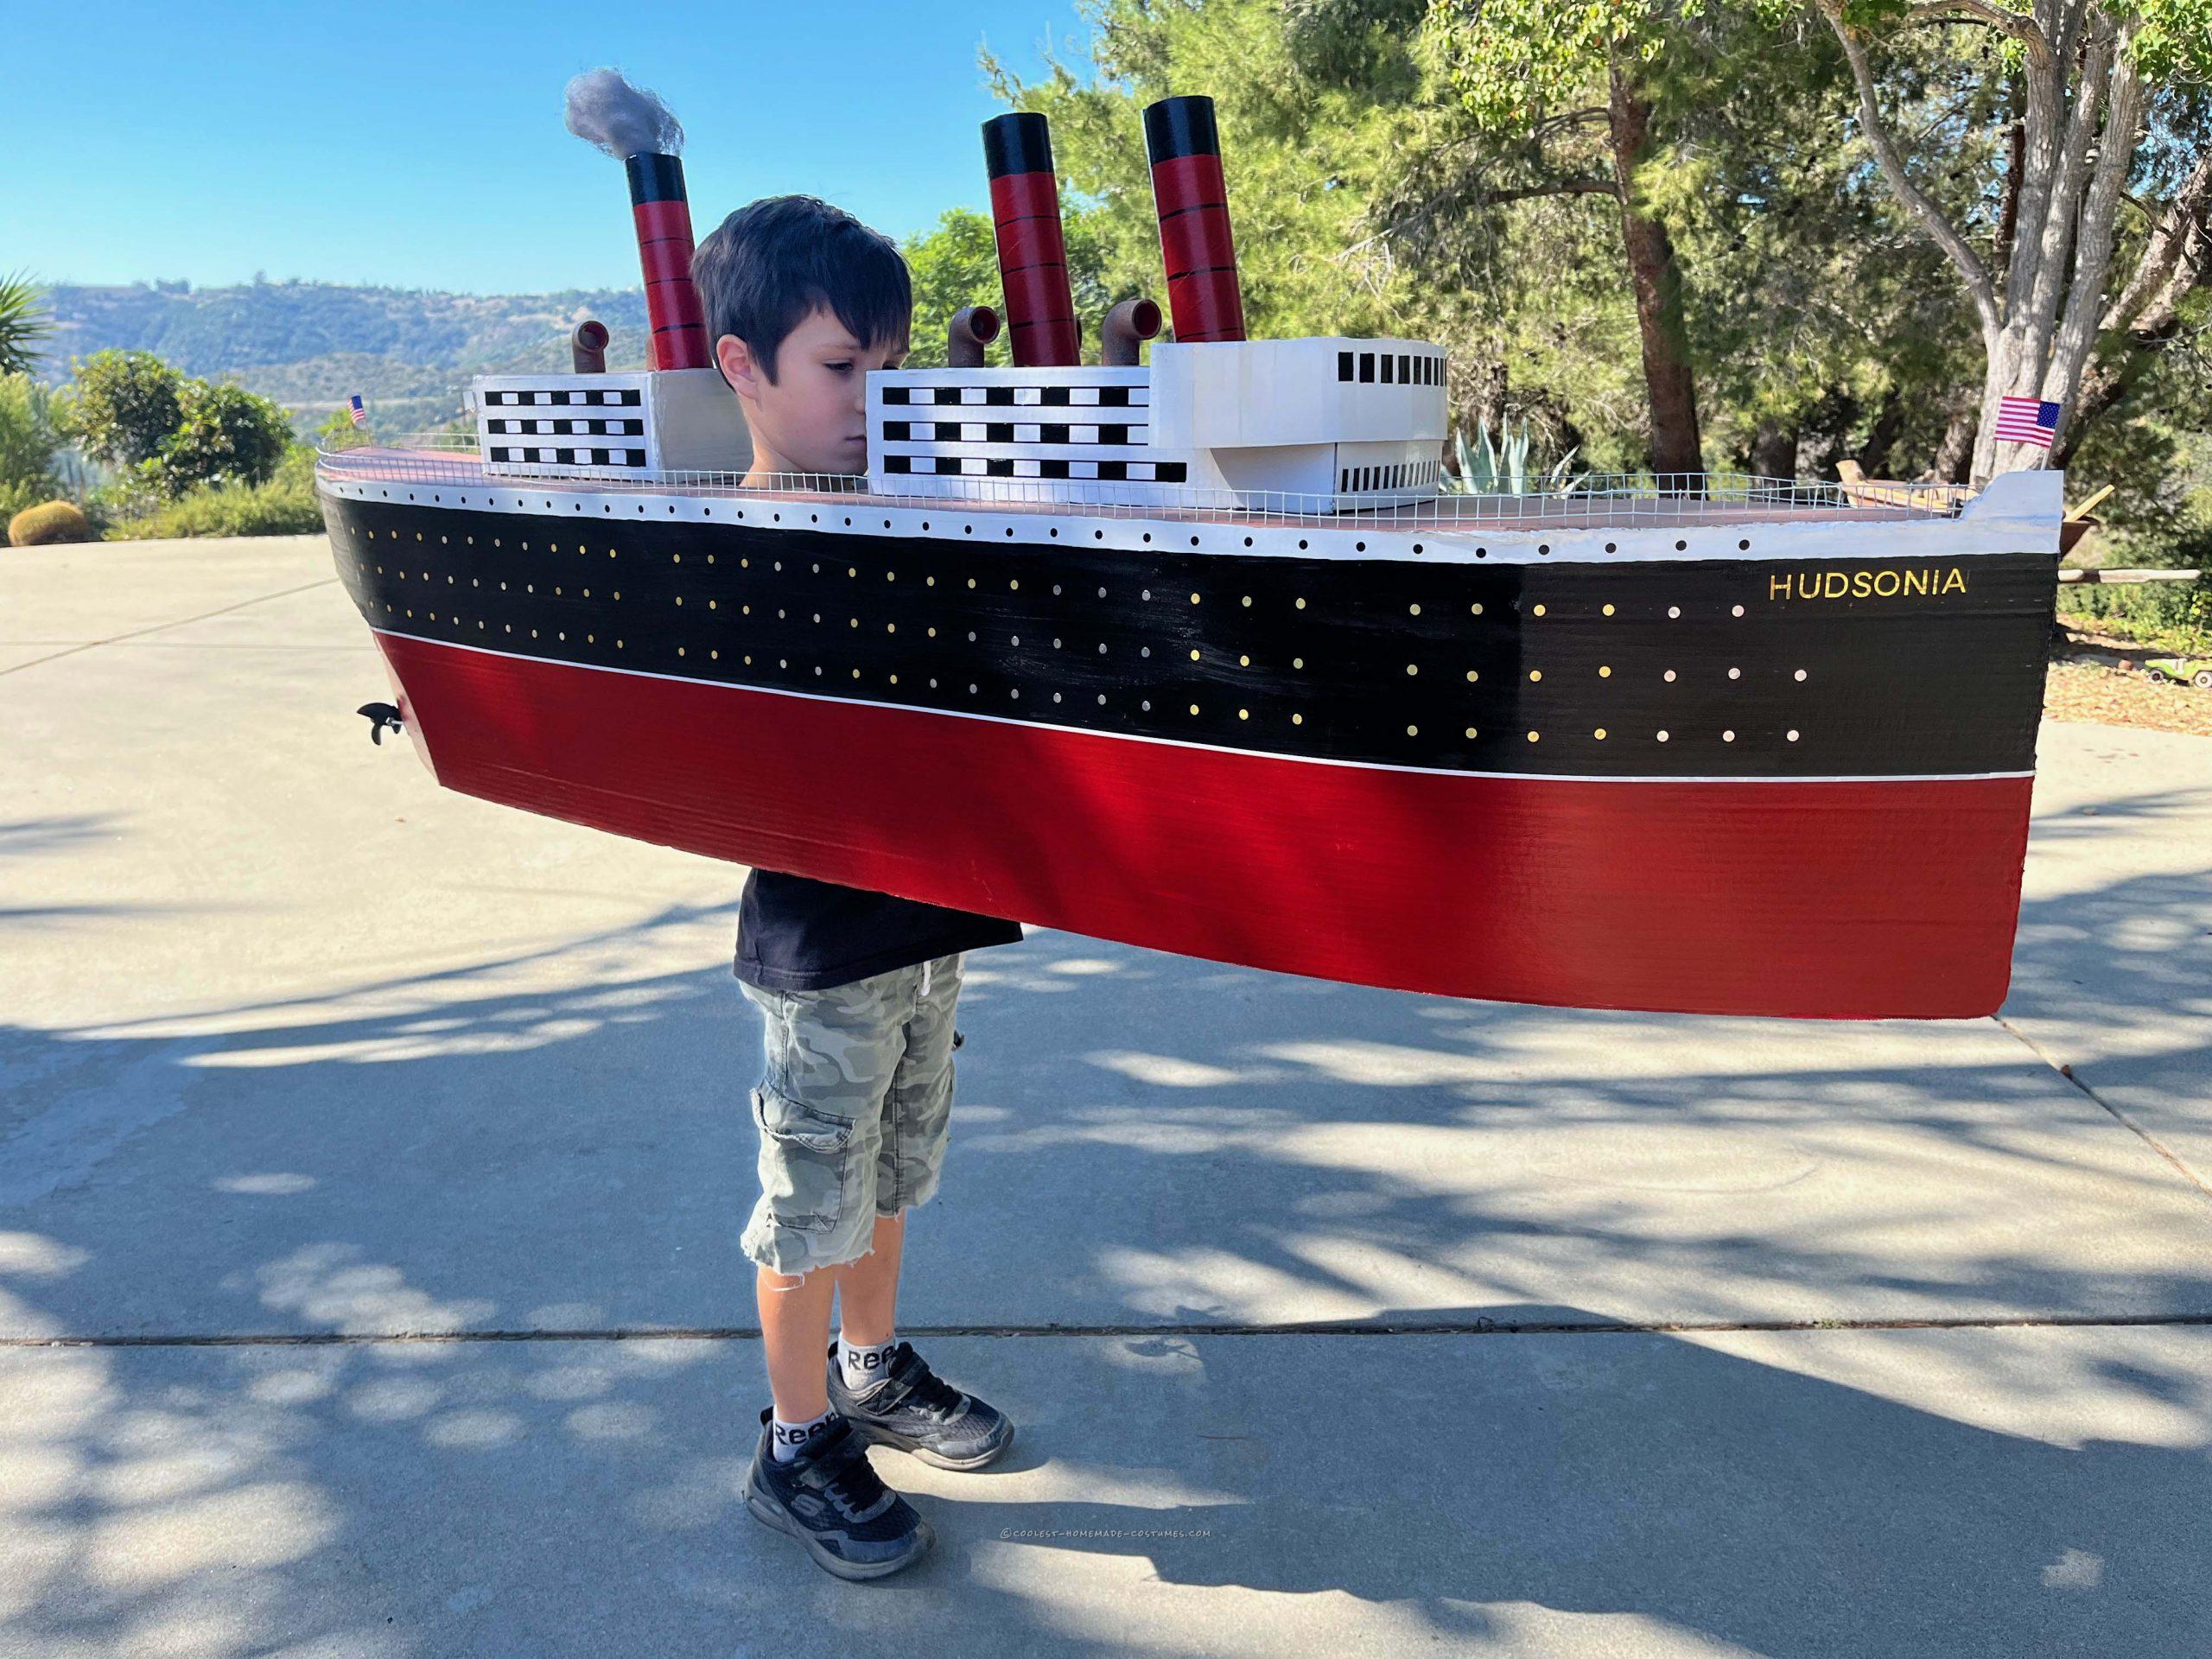 The RMS Hudsonia, a homemade Halloween Costume inspired by the RMS Titanic